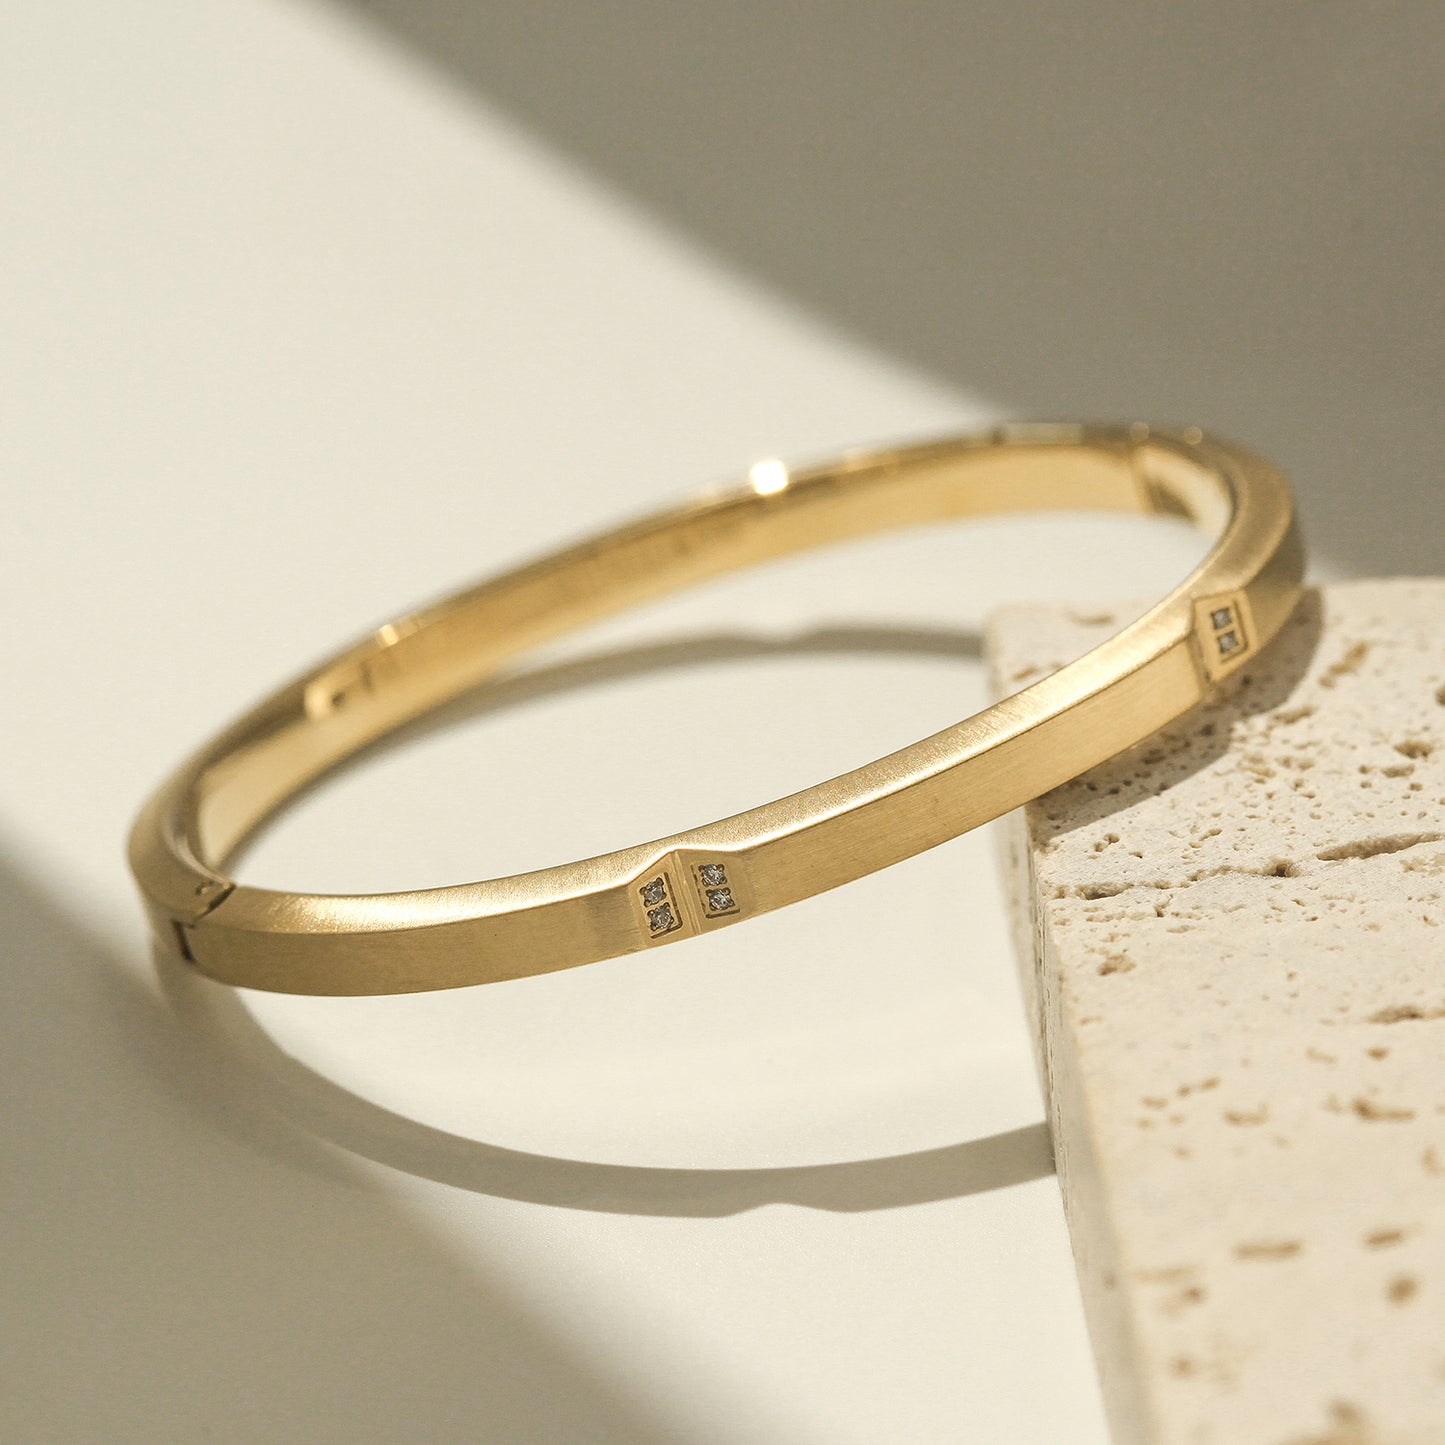 Concave Gold Bangle